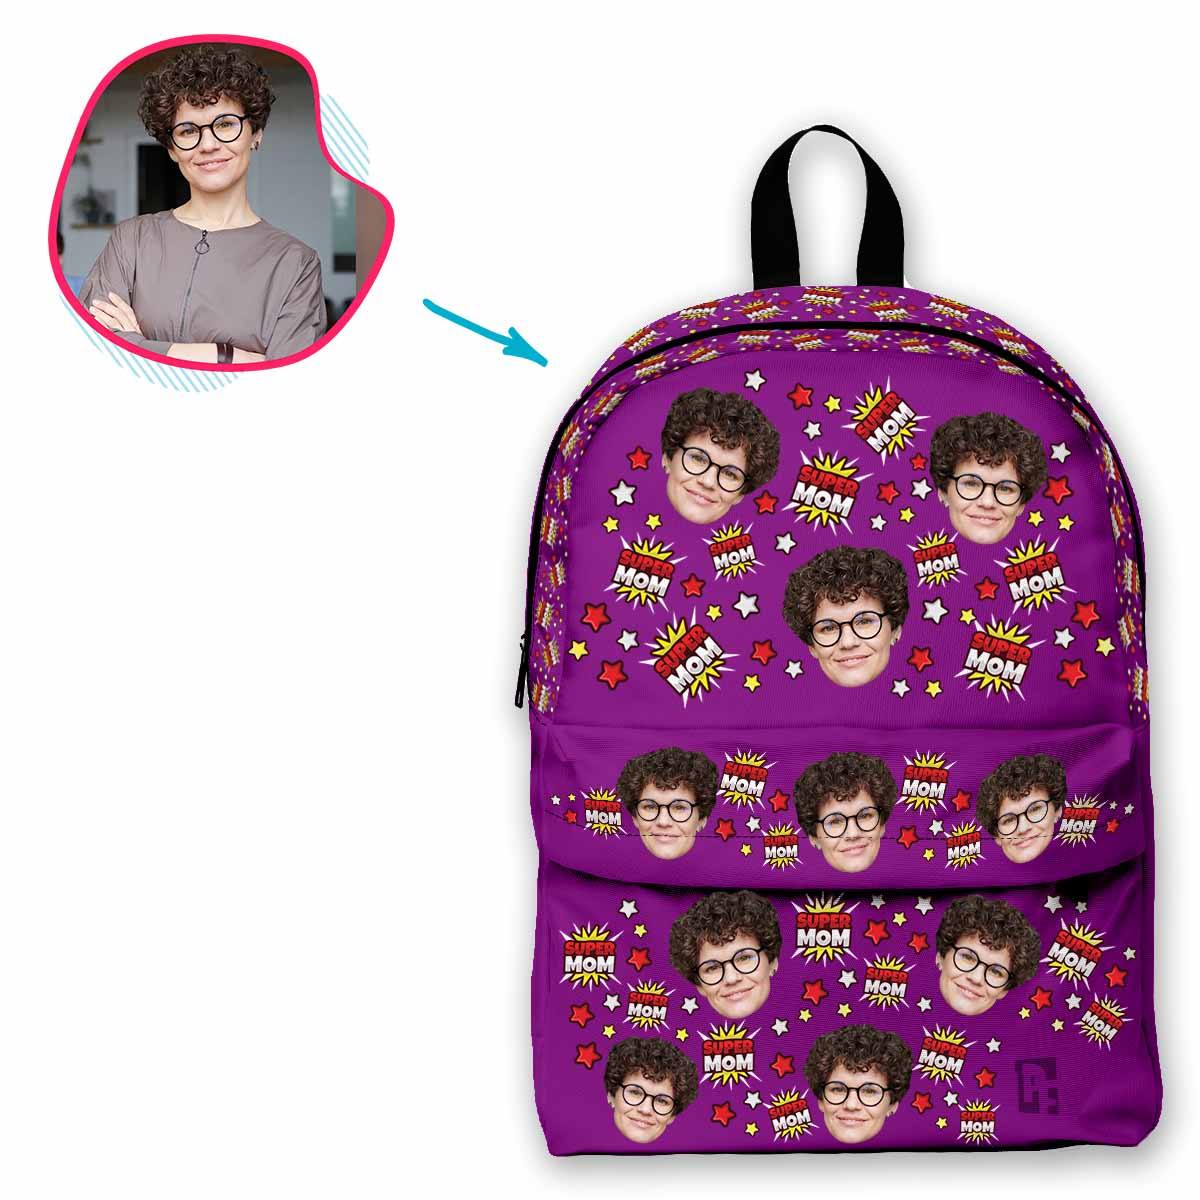 purple Super Mom classic backpack personalized with photo of face printed on it